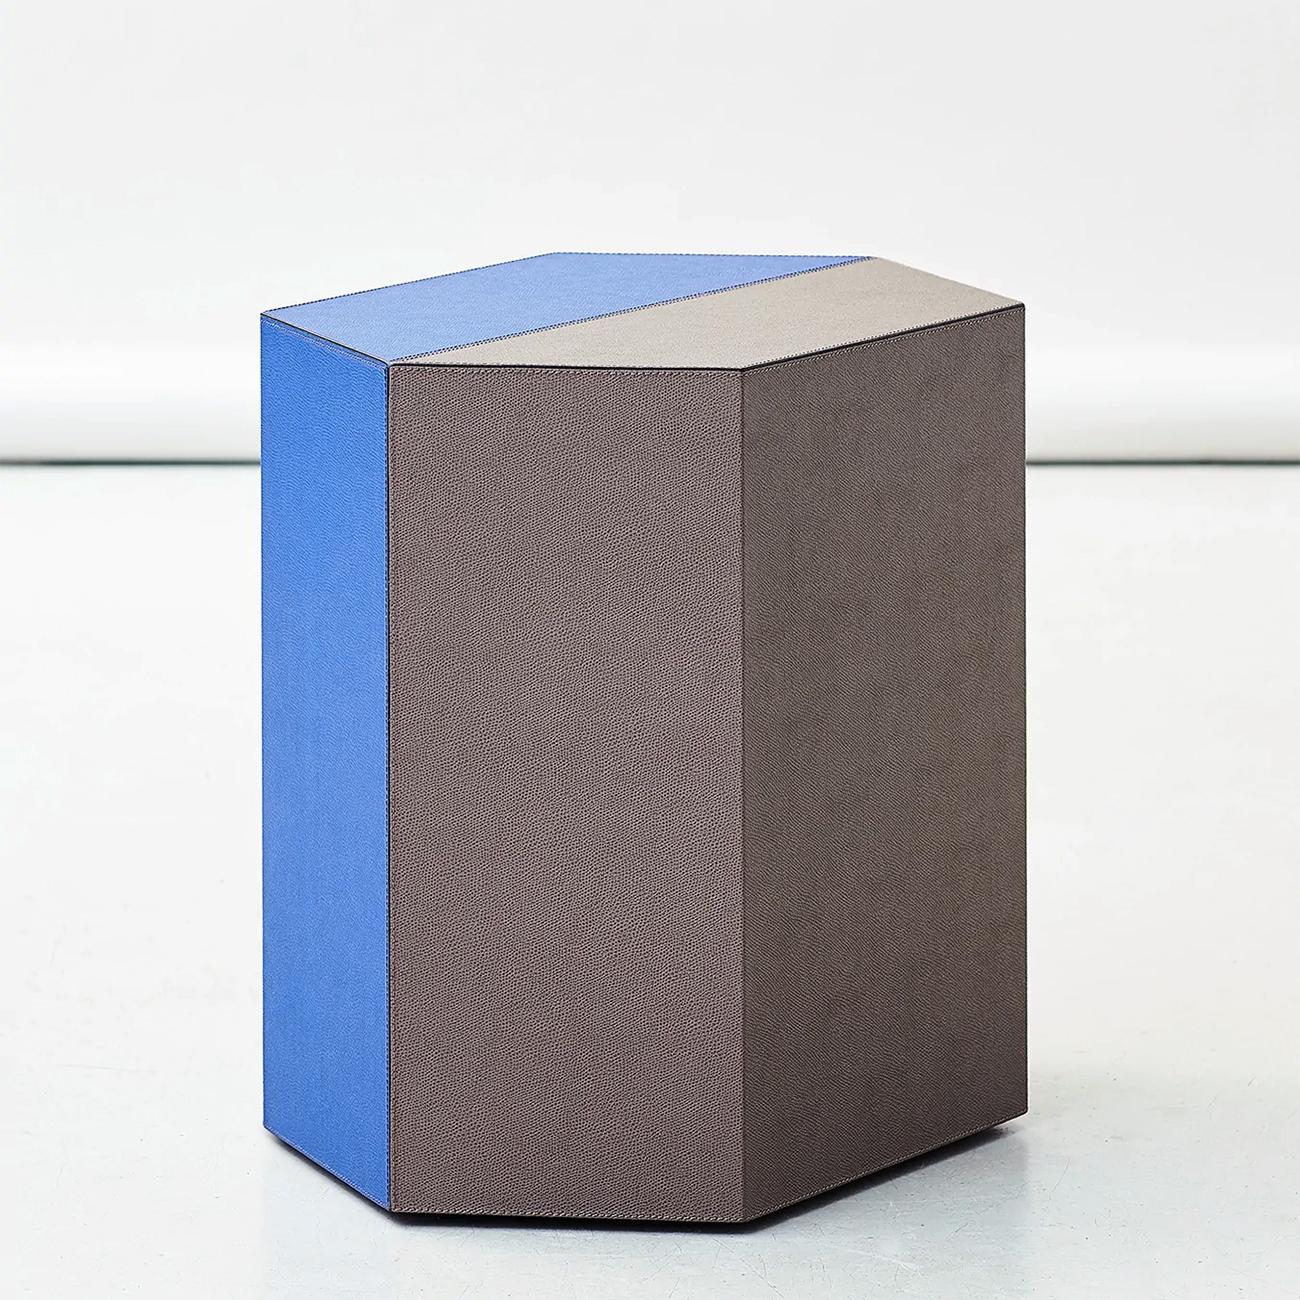 Stool Edwin Blue Brown with solid wooden structure
covered with hand-crafted calfskin leather in blue and
brown color.